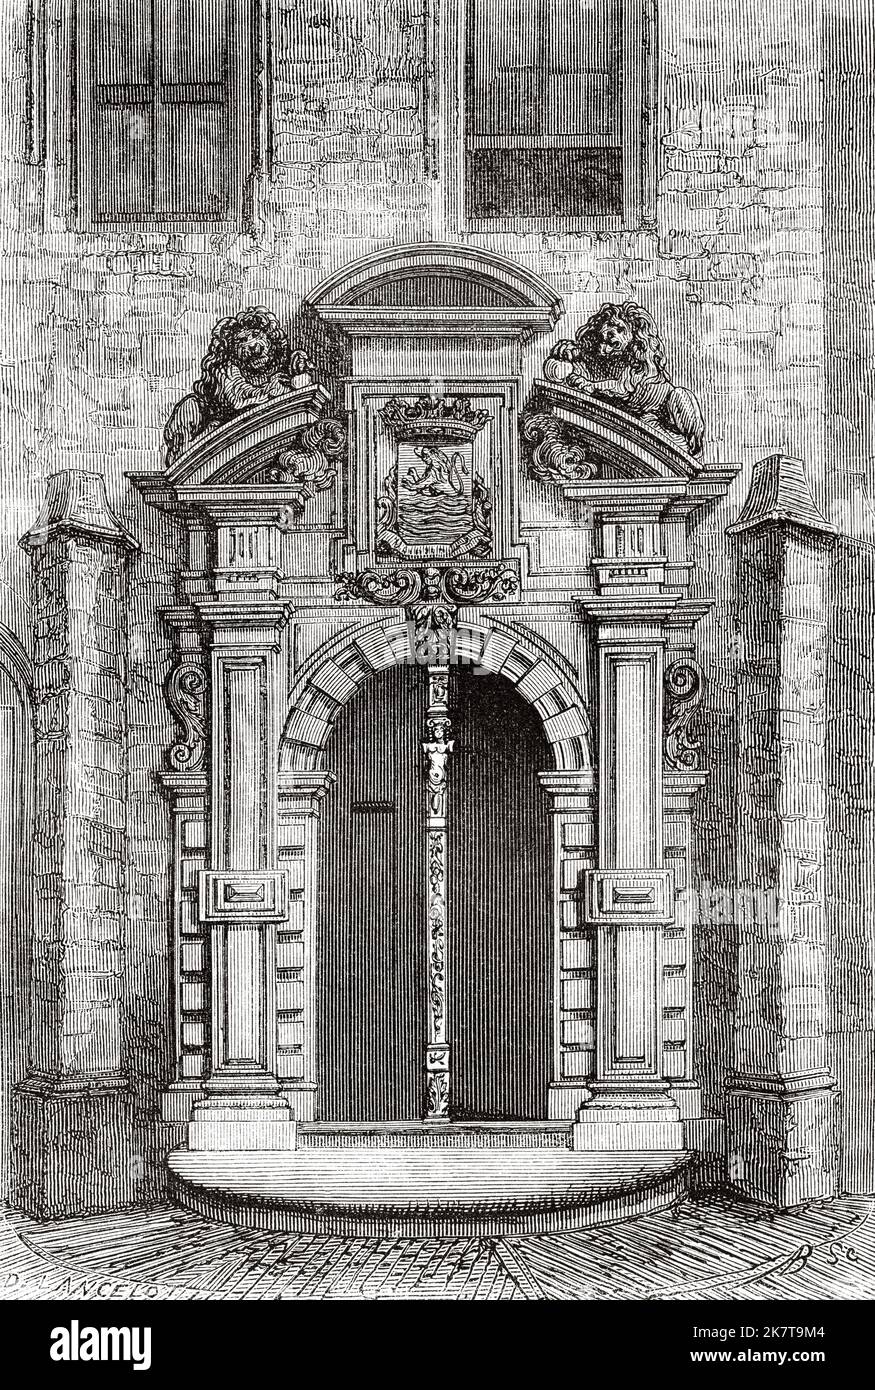 Door to the Province building, Middelburg abbey. Netherlands, Europe. Trip to the Zeeland by Charles De Coster 1873 Stock Photo